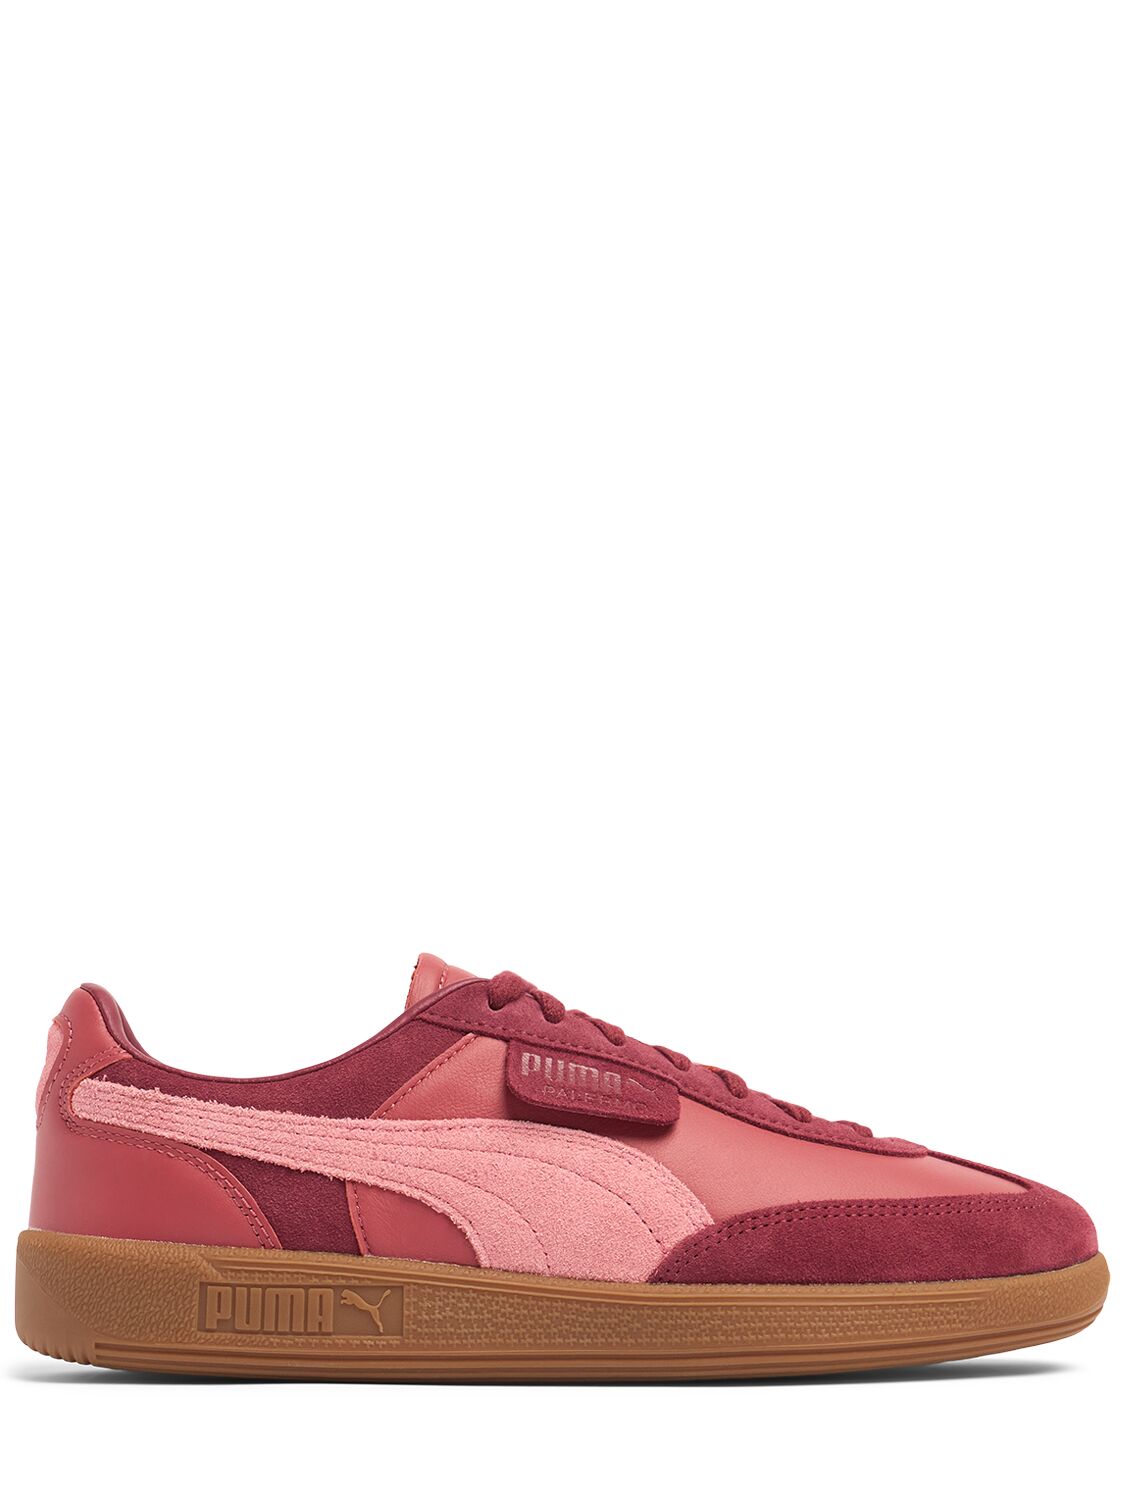 Puma Palermo Sneakers In Red/pink